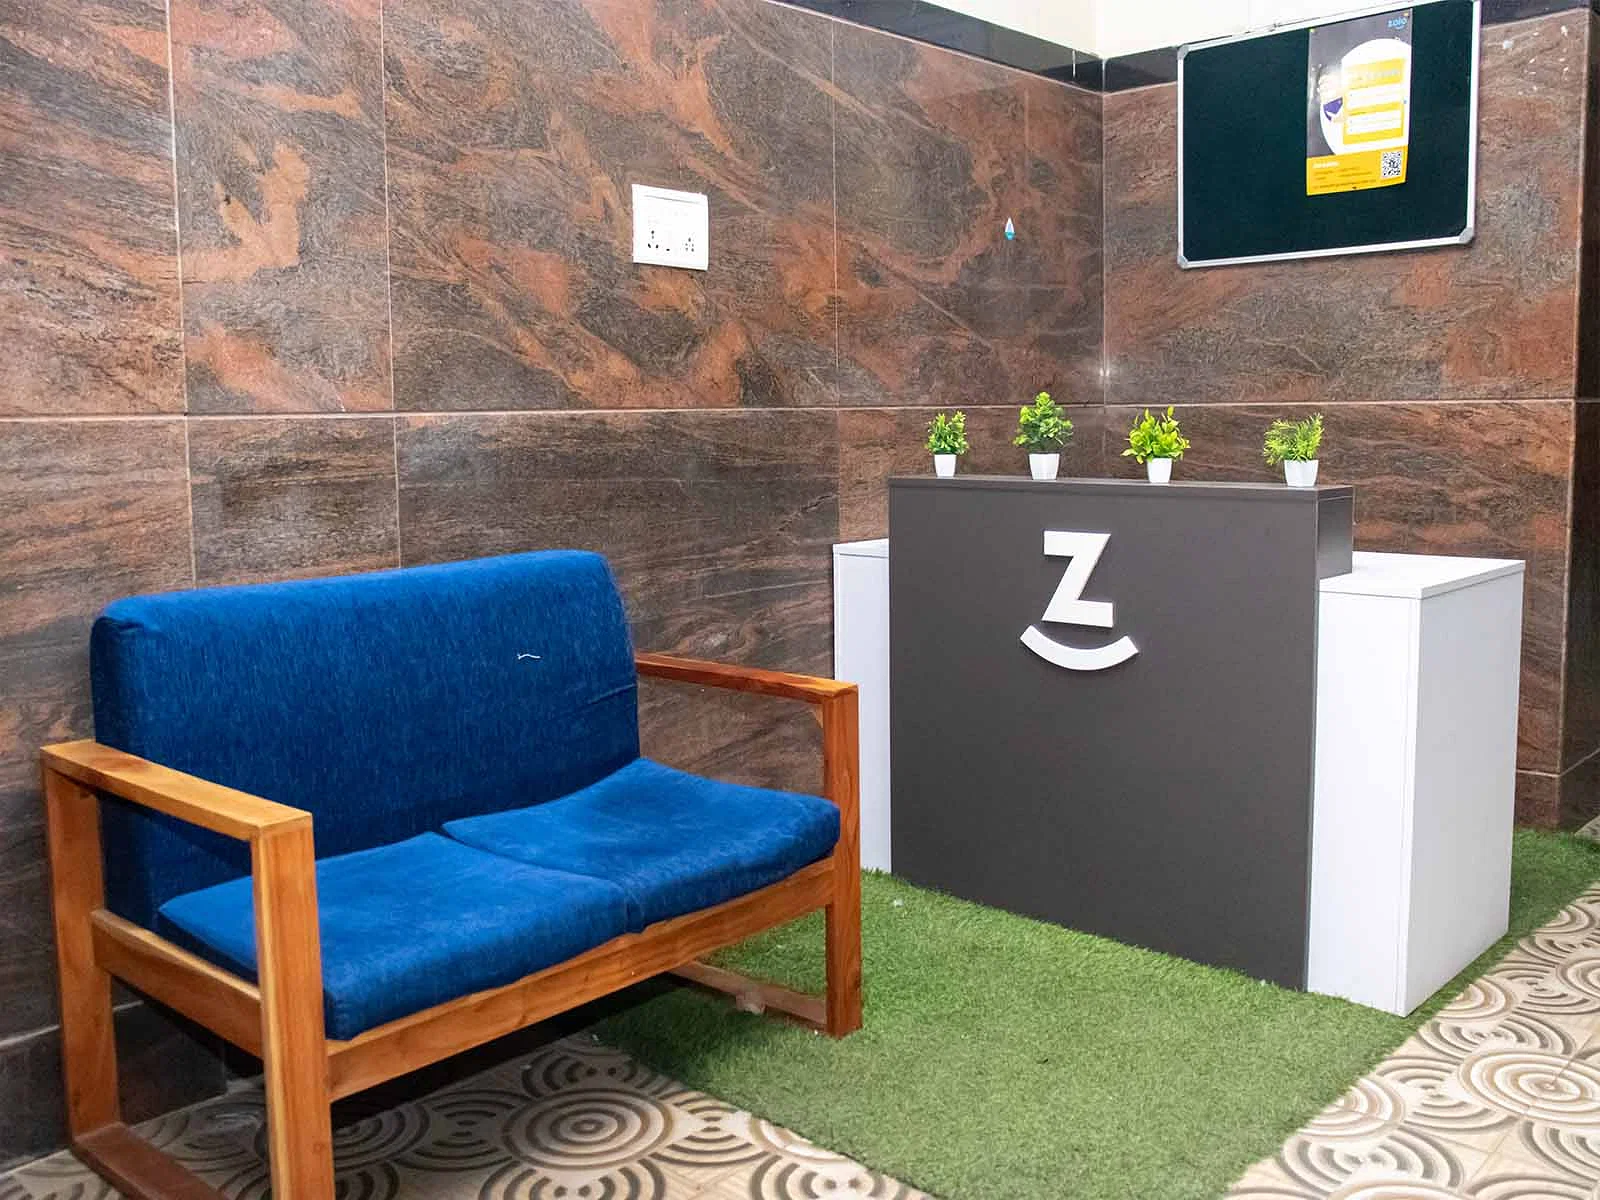 budget-friendly PGs and hostels for men and women with single rooms with daily hopusekeeping-Zolo Mitra